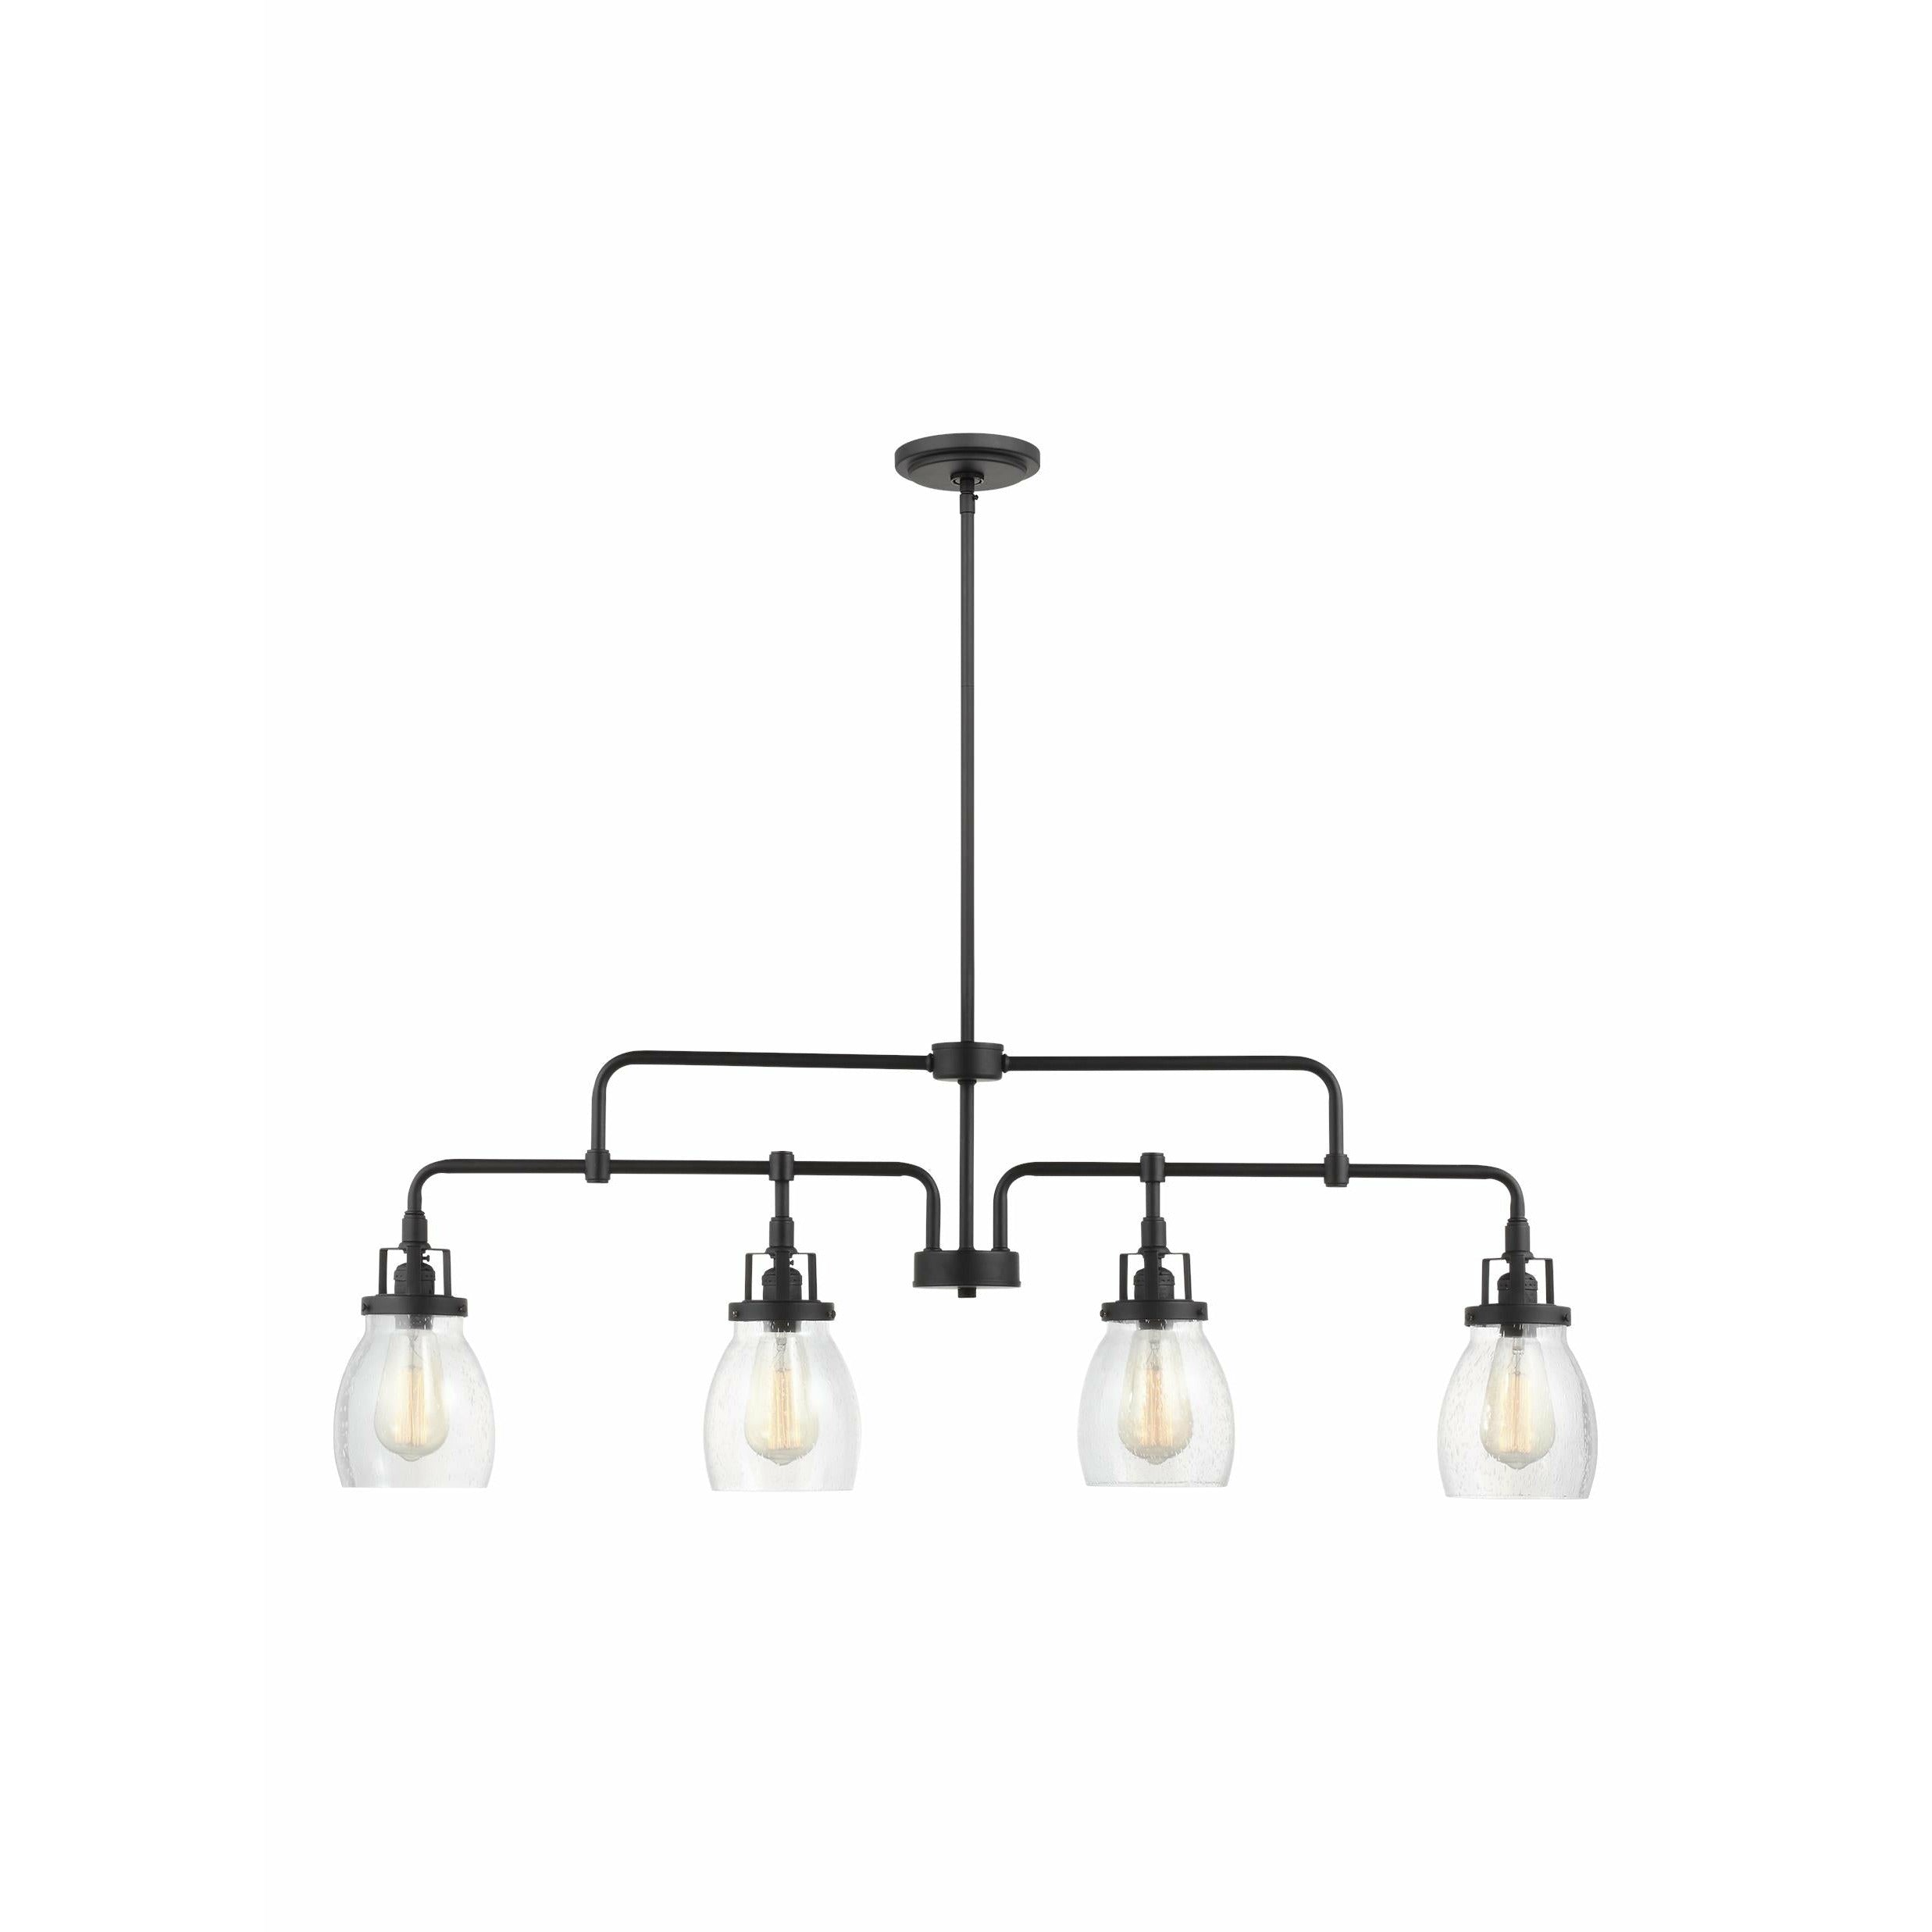 Belton 4-Light Linear Suspension (with Bulbs)